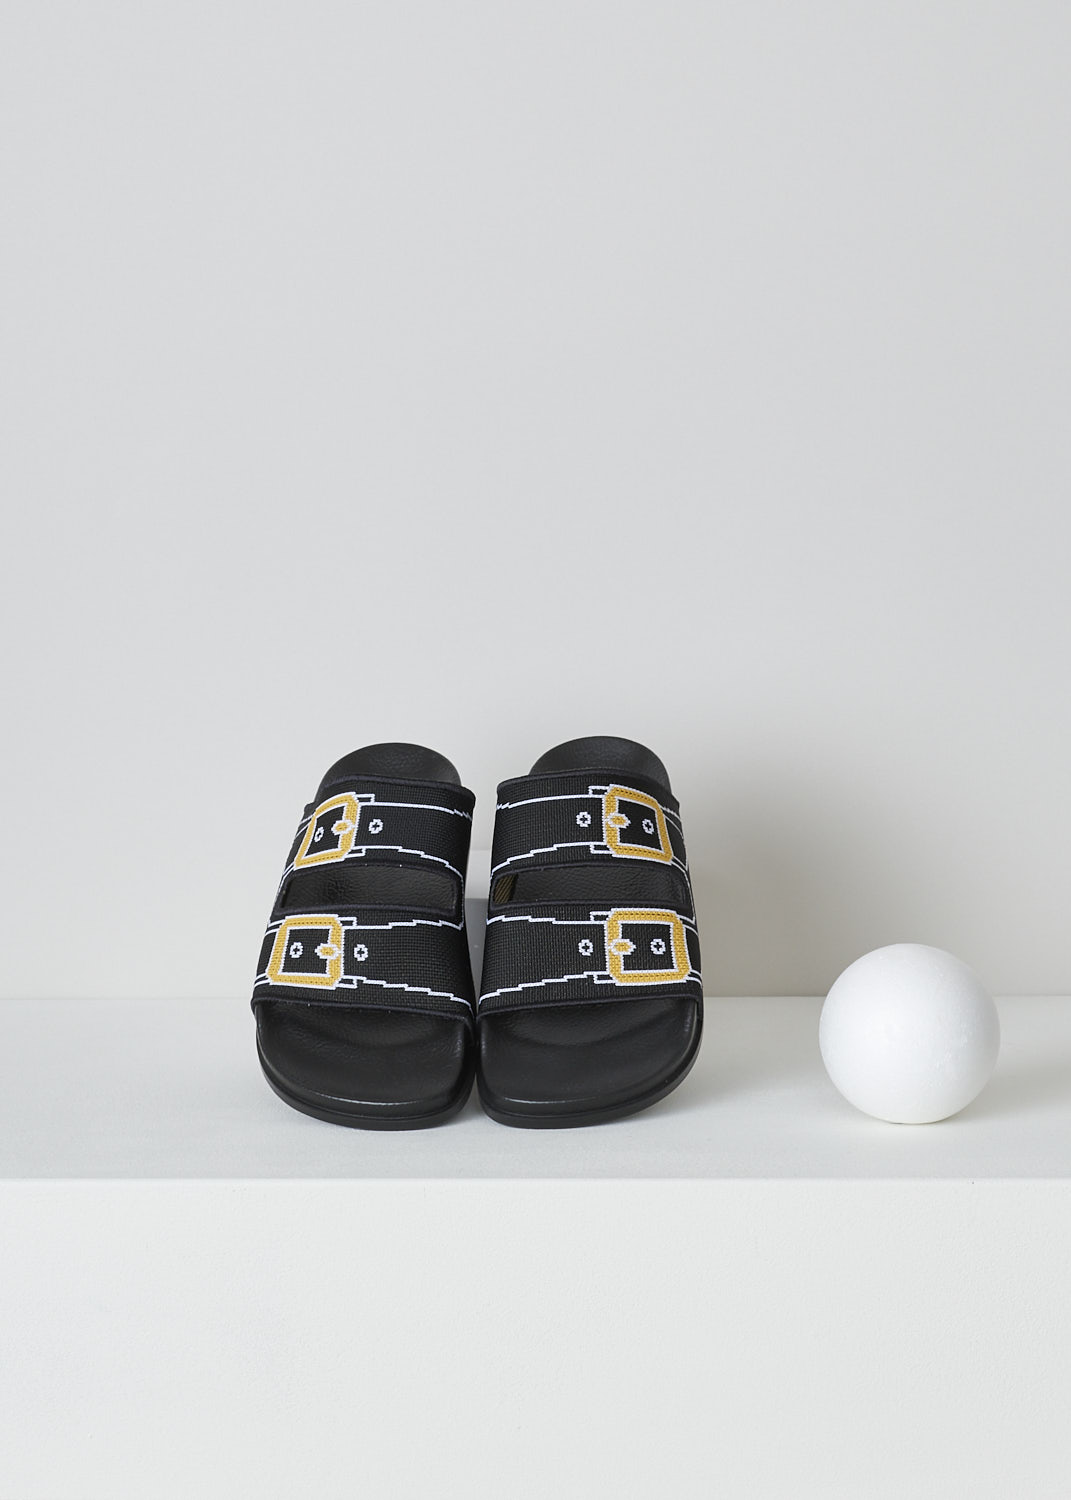 MARNI, BLACK TROMPE L'OEIL JACQUARD SLIDES, SAMS015802_P4547_ZO137, Black, Top, These black knitted slides have a trompe l'oeil image woven into the straps across the vamp. The image depicts straps with gold buckles. The brand's logo is woven into the side. These slip-on slides have a round open toe. The slides have a molded footbed and a flat rubber sole. 
 
 
